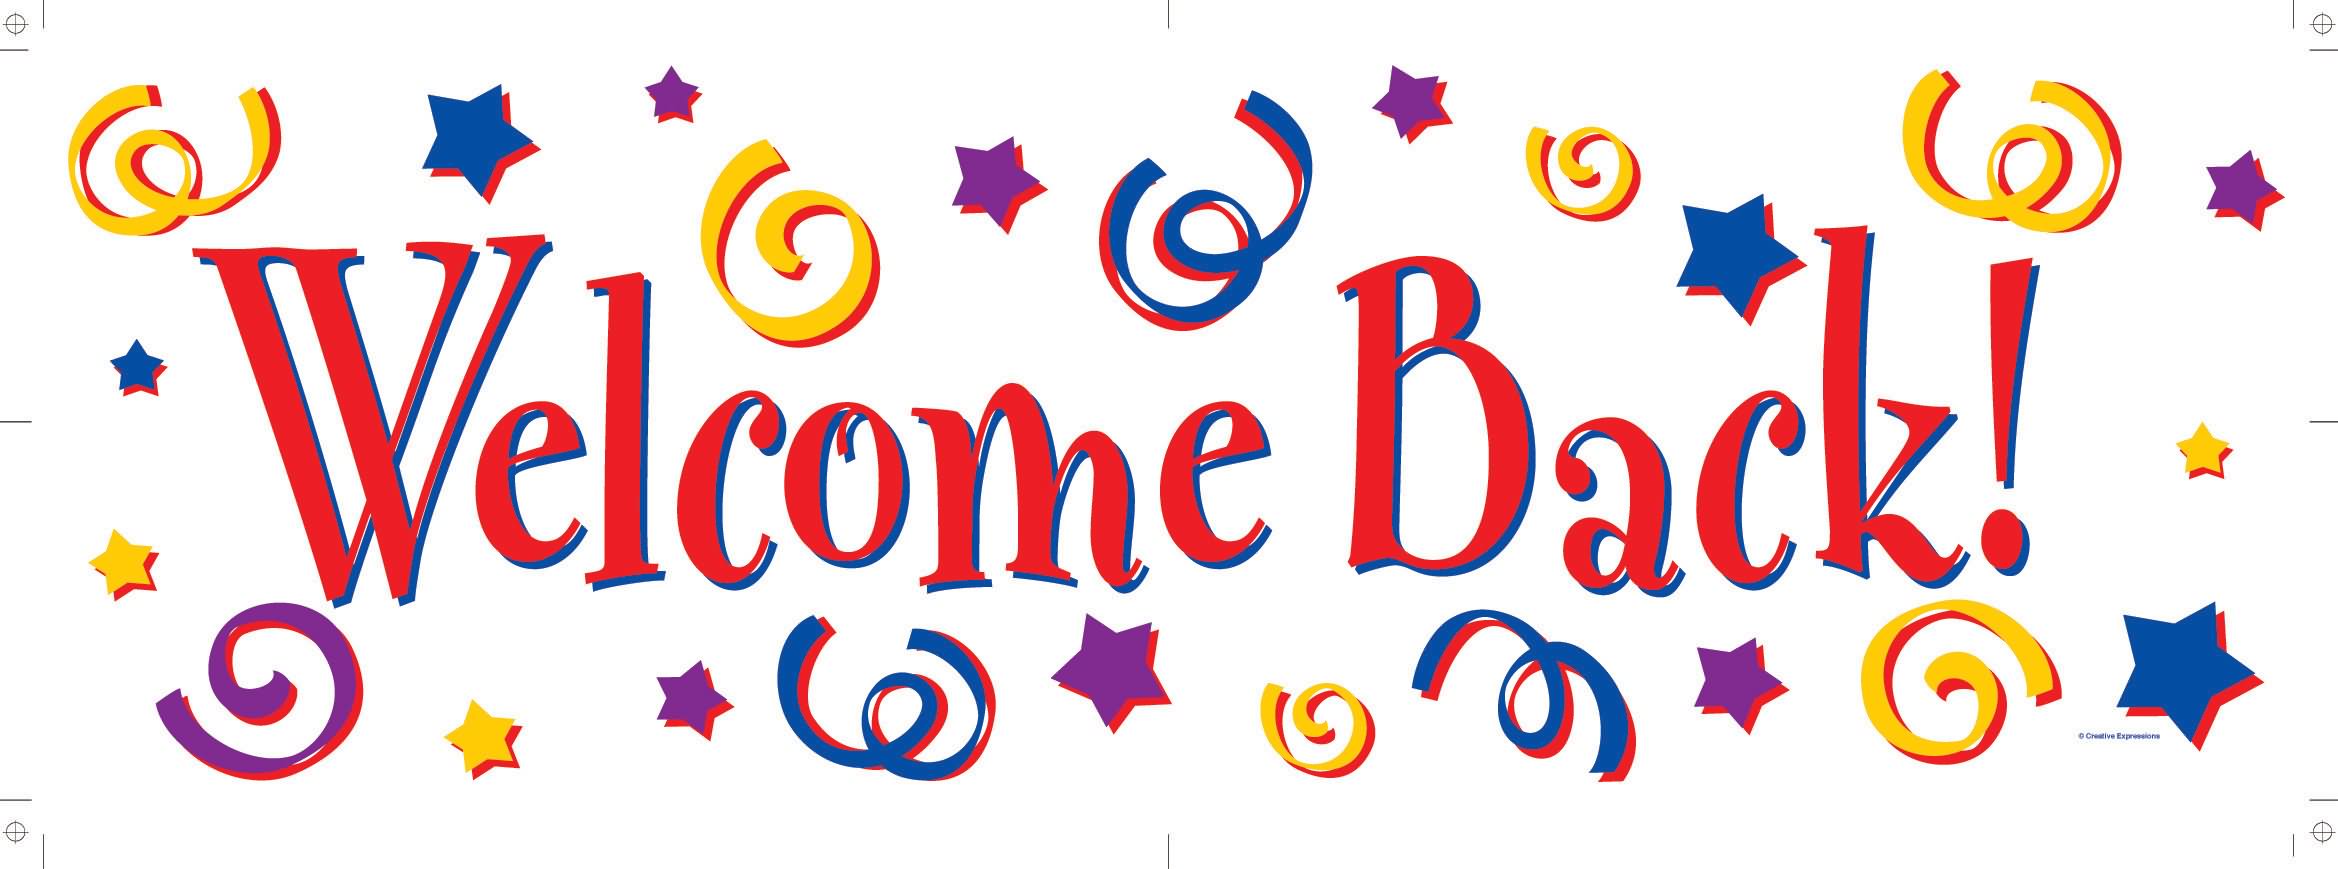 Welcome Aboard Clipart Welcome Back Jpg